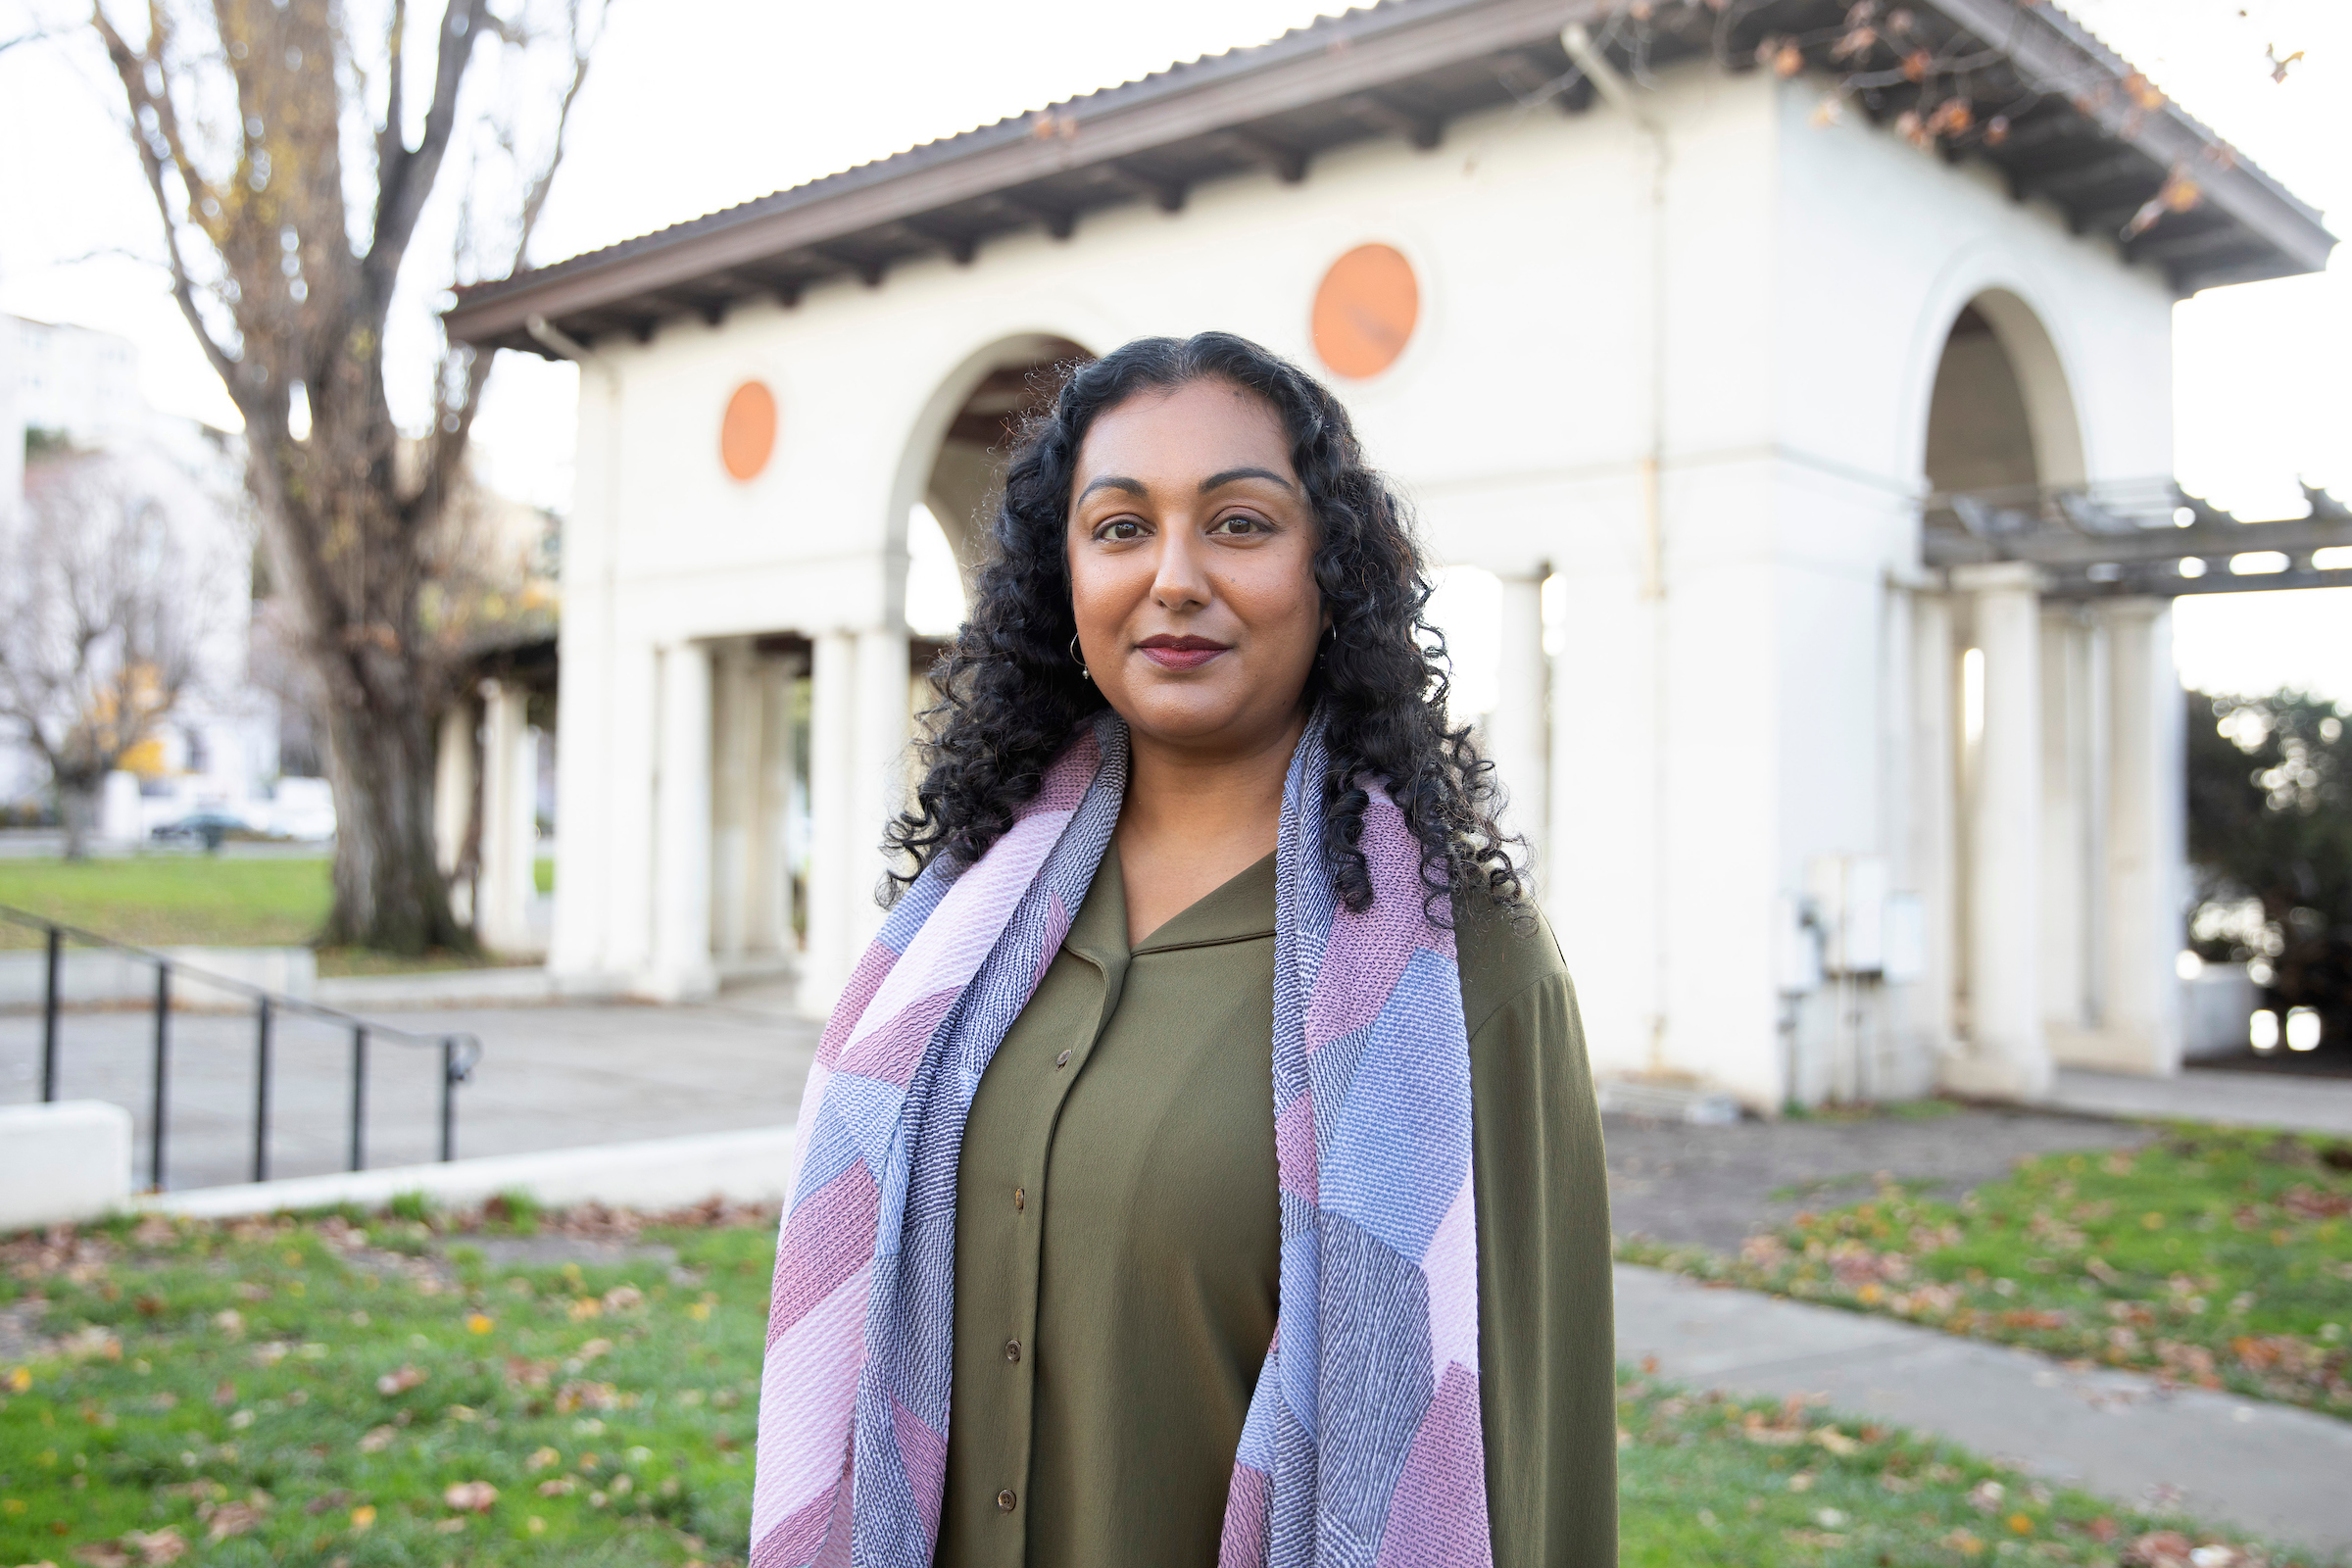 Tasneem Raja will lead the as yet unnamed Oakland journalism platform as Editor-in-Chief.